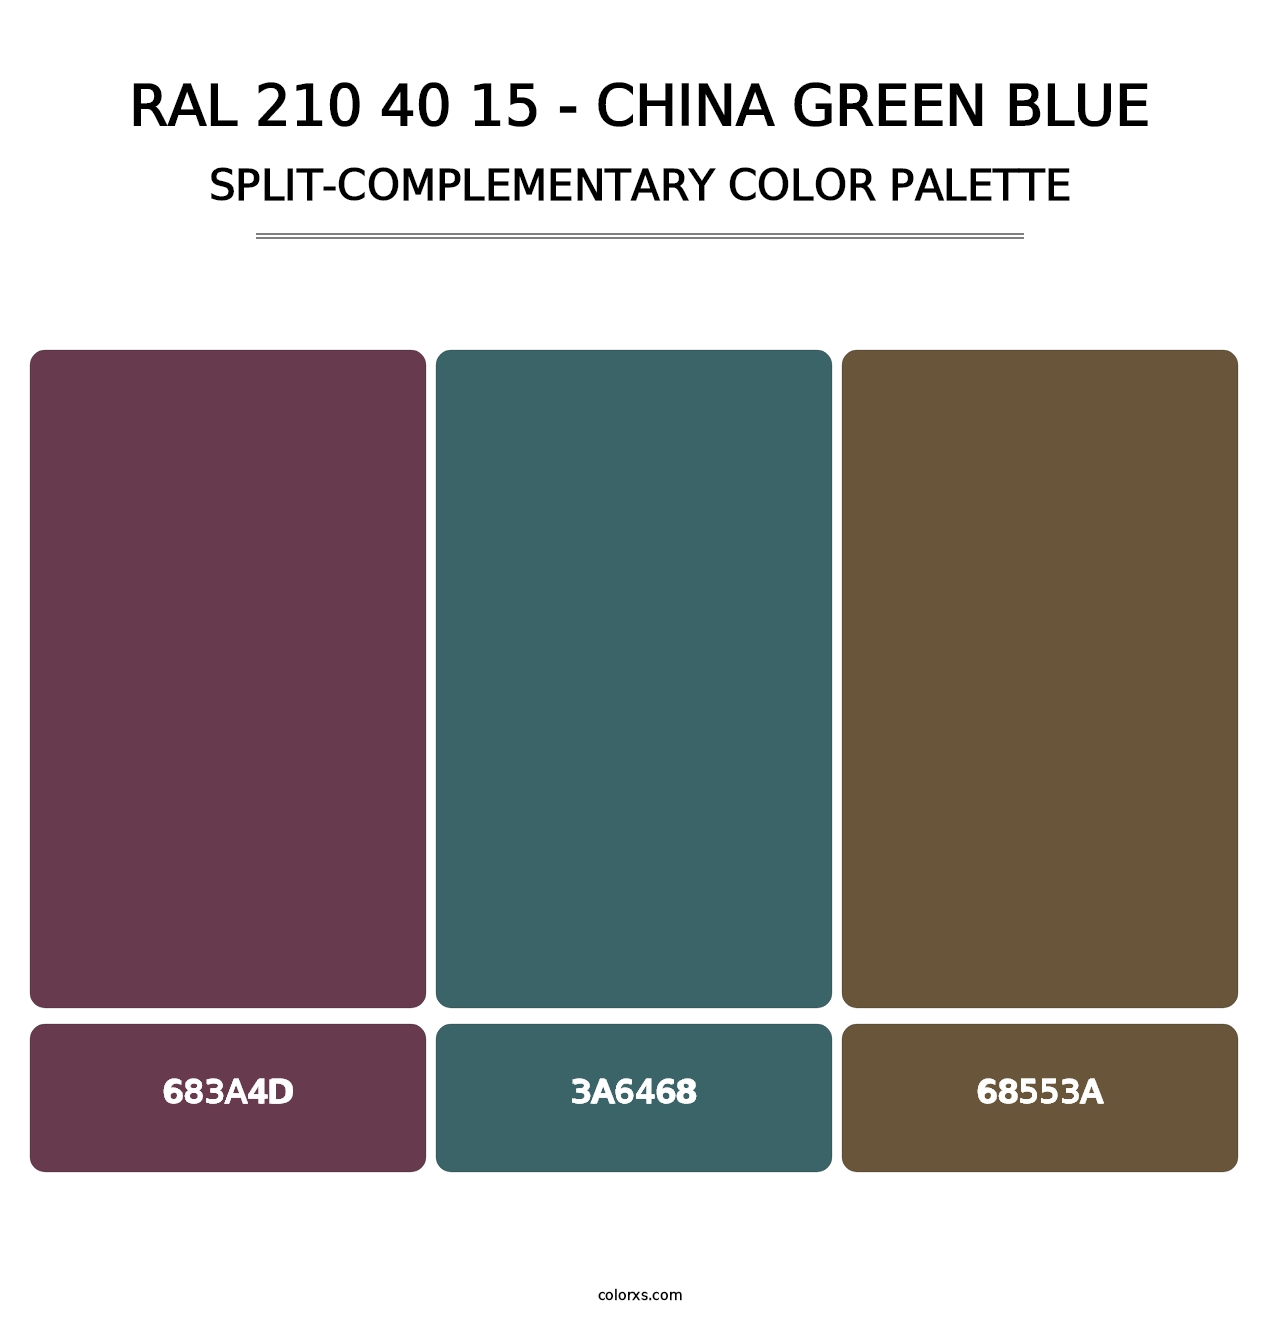 RAL 210 40 15 - China Green Blue - Split-Complementary Color Palette